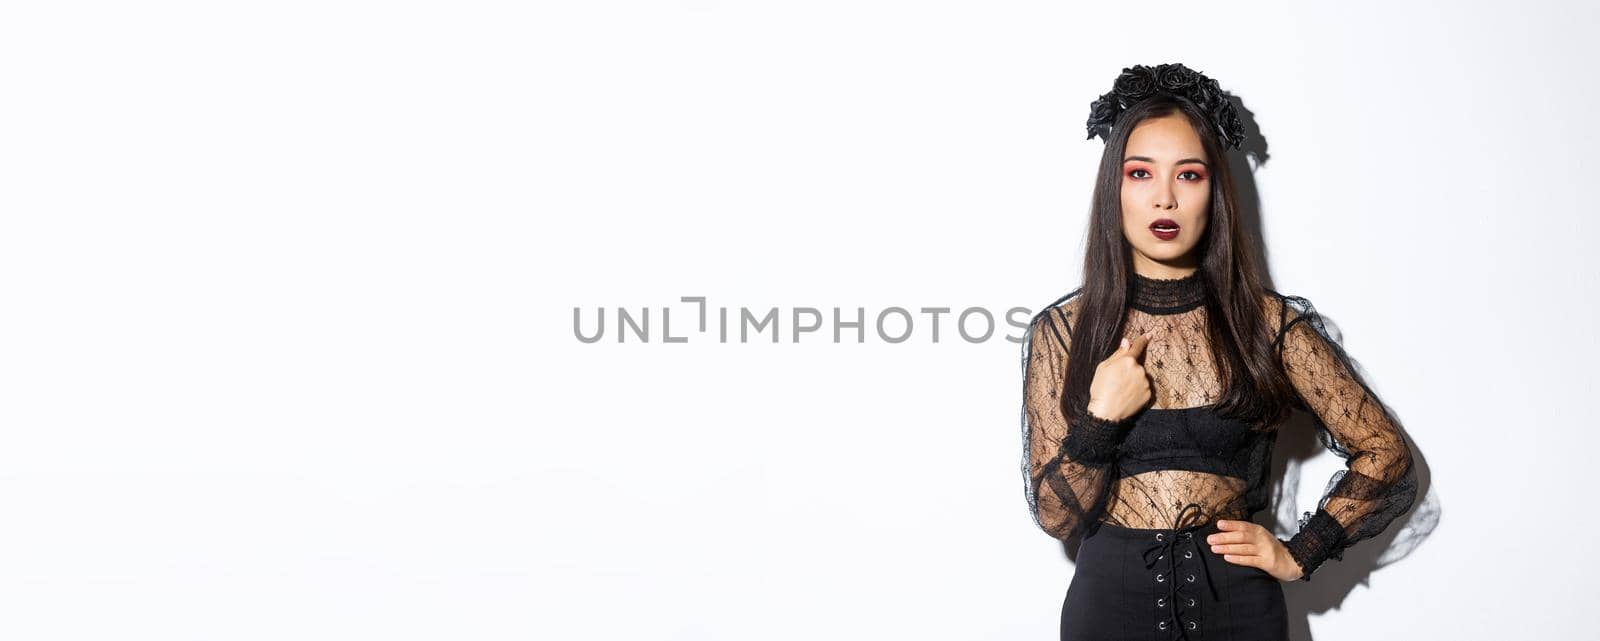 Annoyed and confused asian woman in witch halloween costume pointing at herself, looking bothered and unamused, standing reluctant over white background.